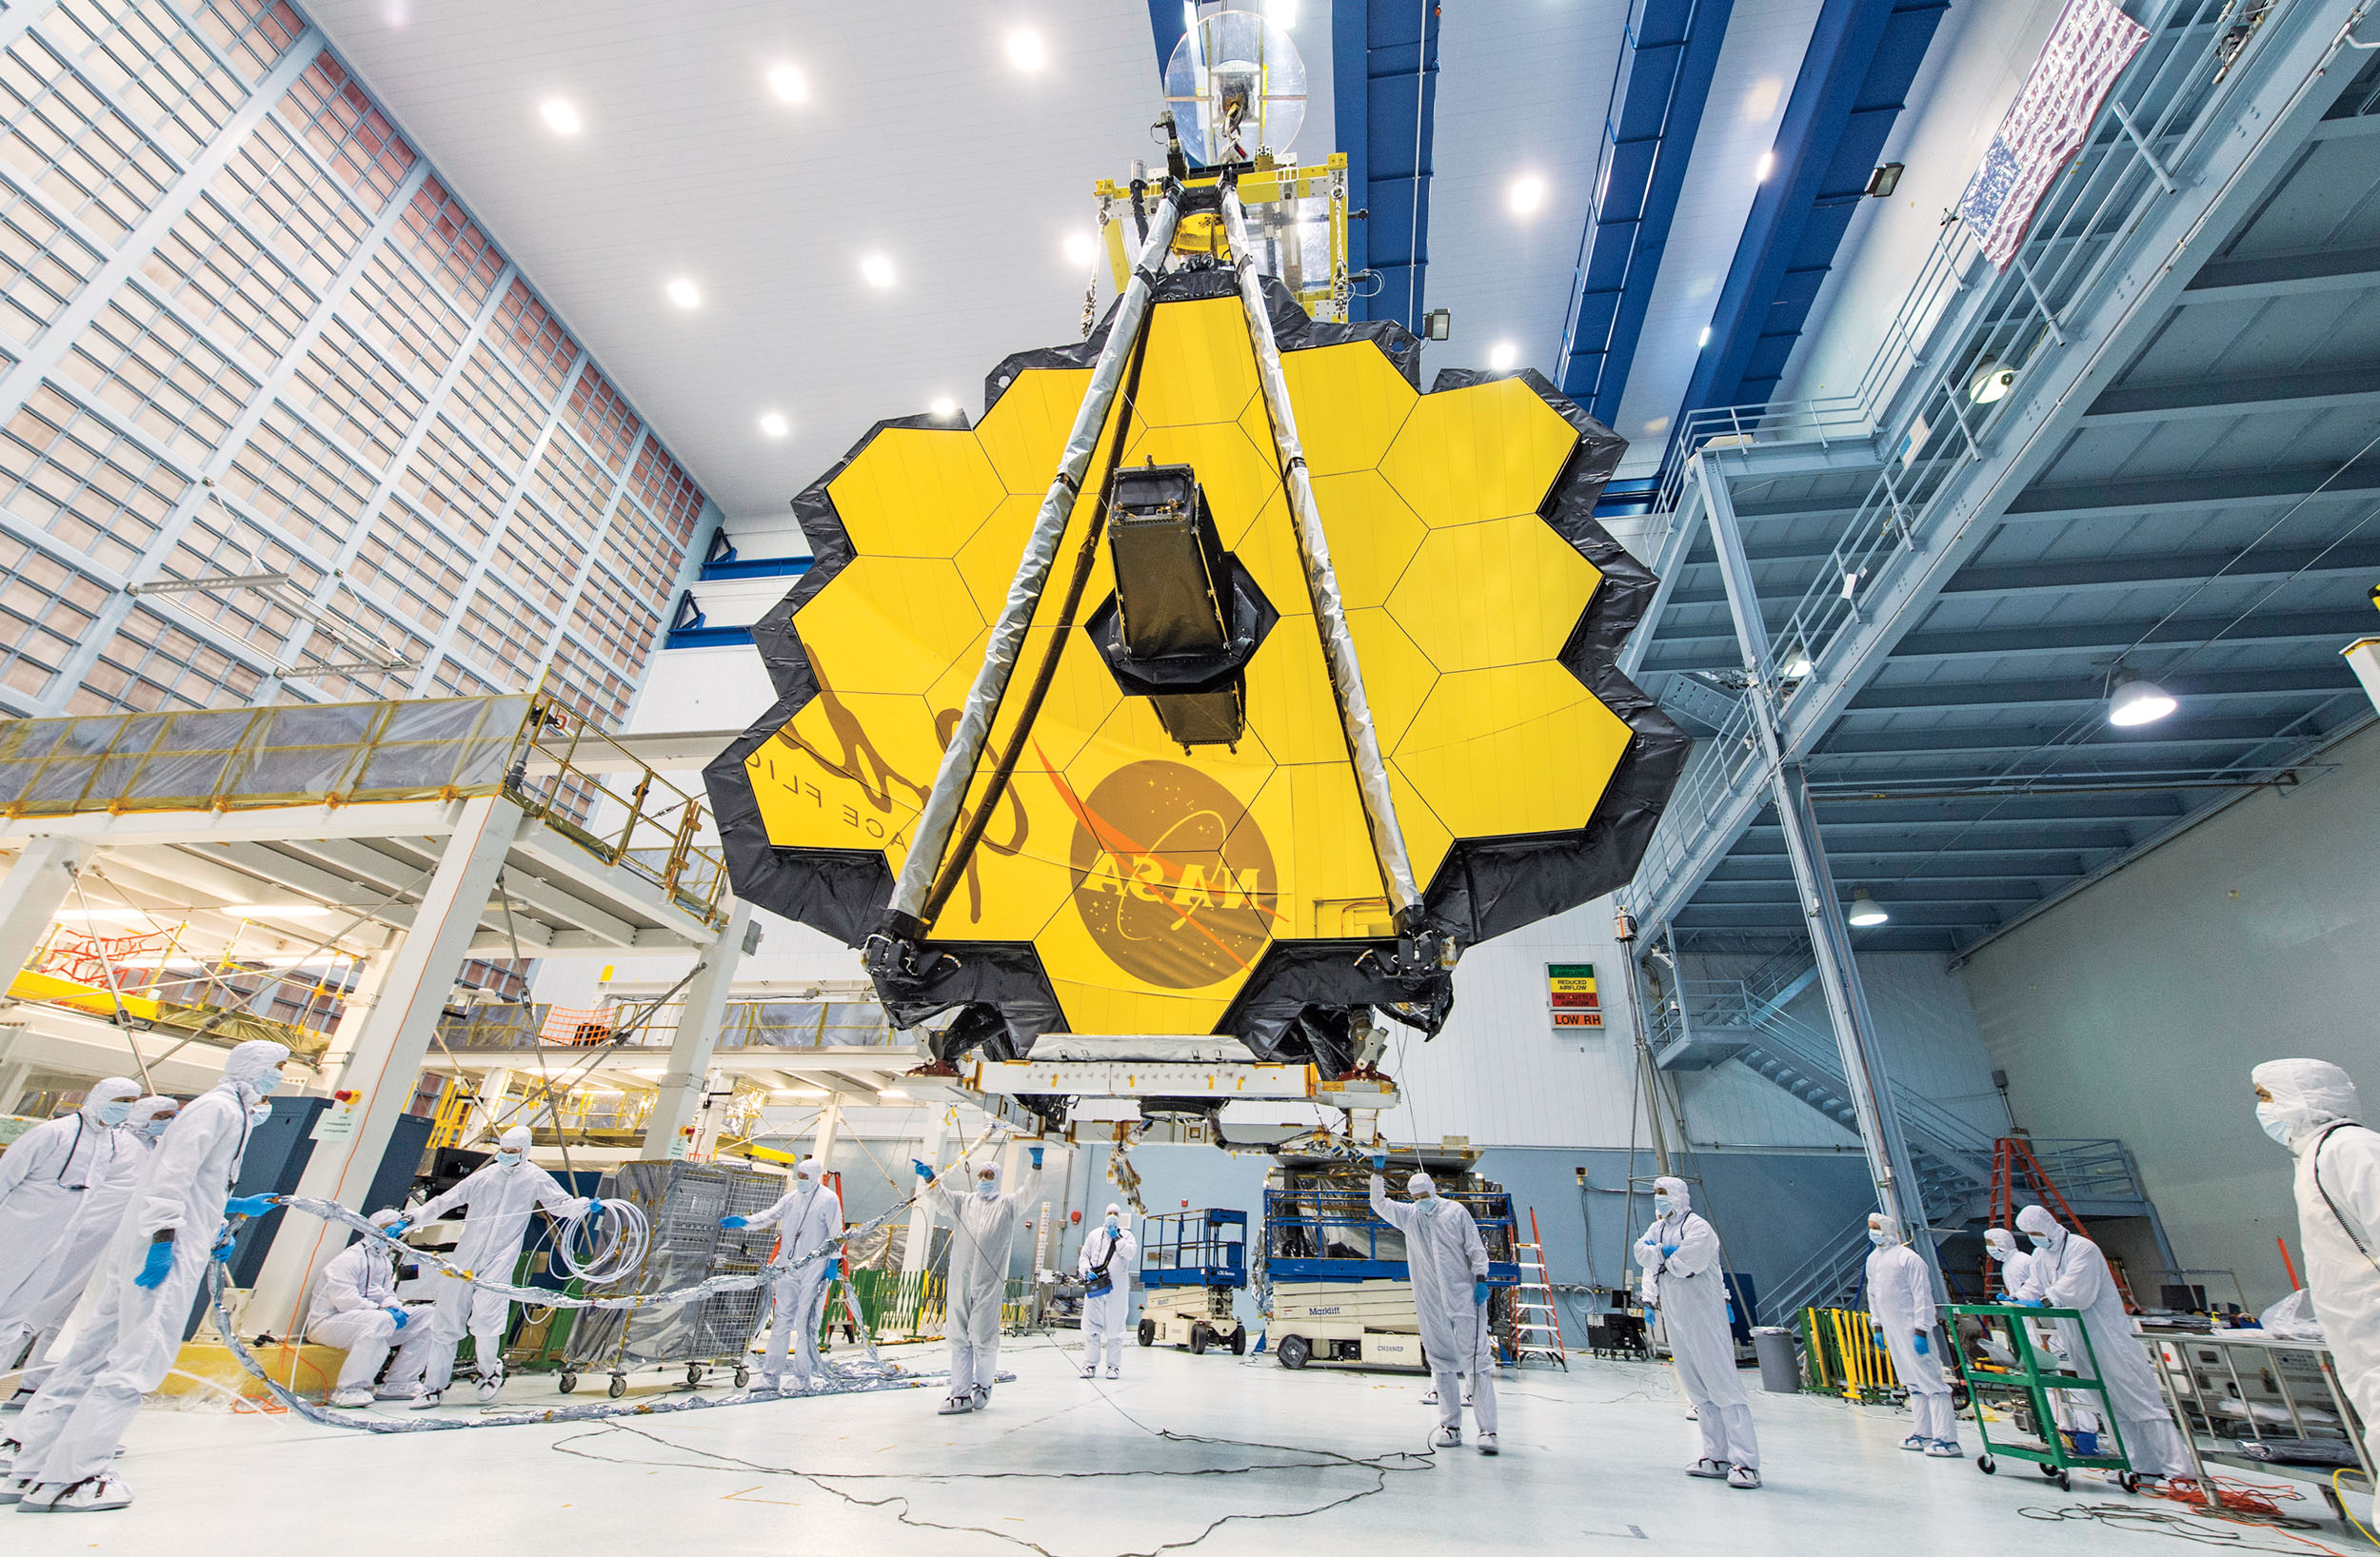 The New $ 10 Billion James Webb Space Telescope;  As the private sector funds routine space flights, space agencies can 'push the boundaries' (Courtesy of Desiree Stover / NASA)